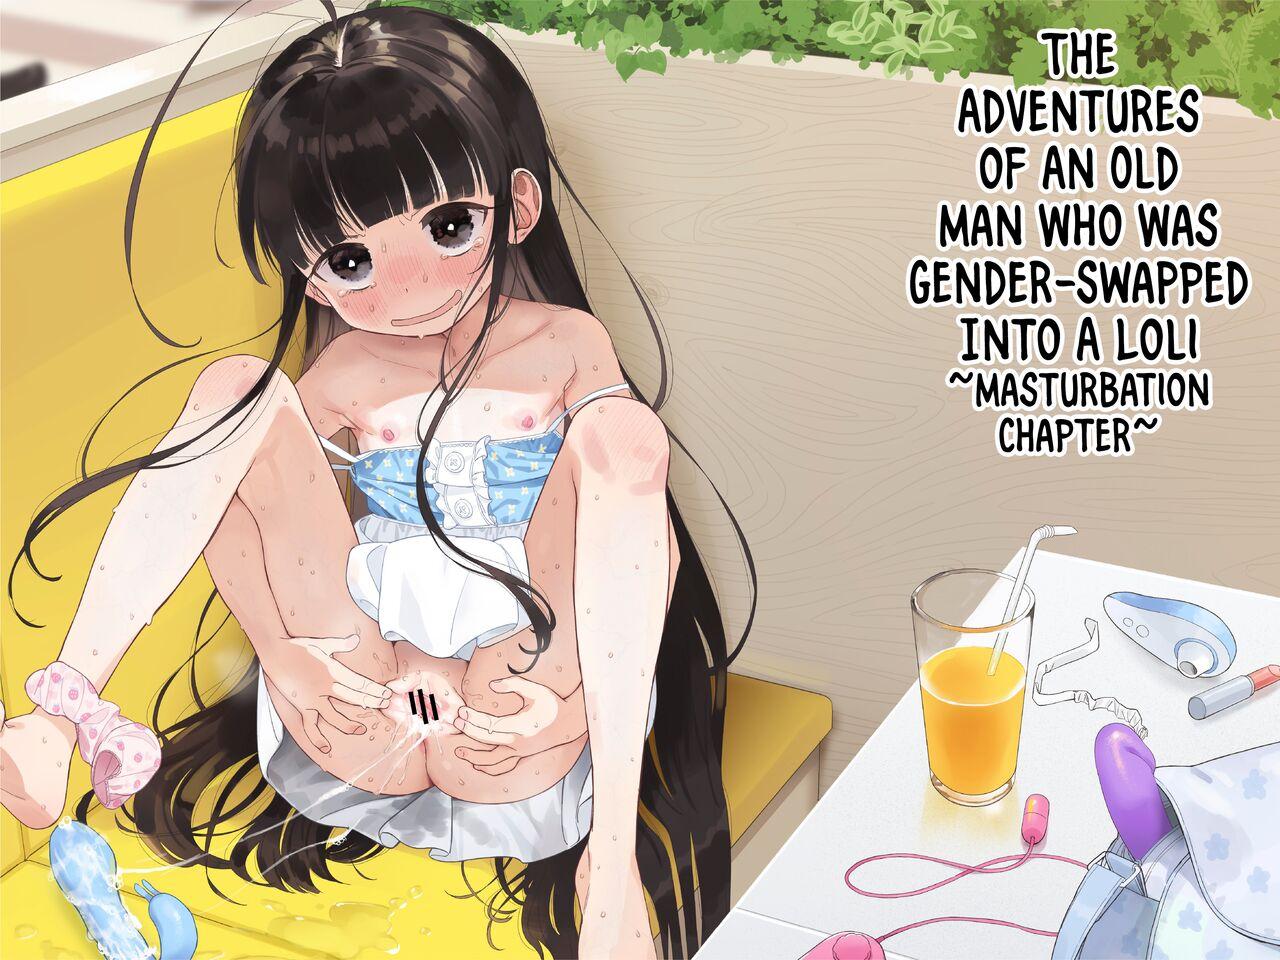 Big Boobs [Asunaro Neat. (Ronna)] TS Loli Oji-san no Bouken Onanie Hen | The Adventures of an Old Man Who Was Gender-Swapped Into a Loli ~Masturbation Chapter~ [English] [CulturedCommissions] [Digital] - Original Girl Gets Fucked - Picture 1